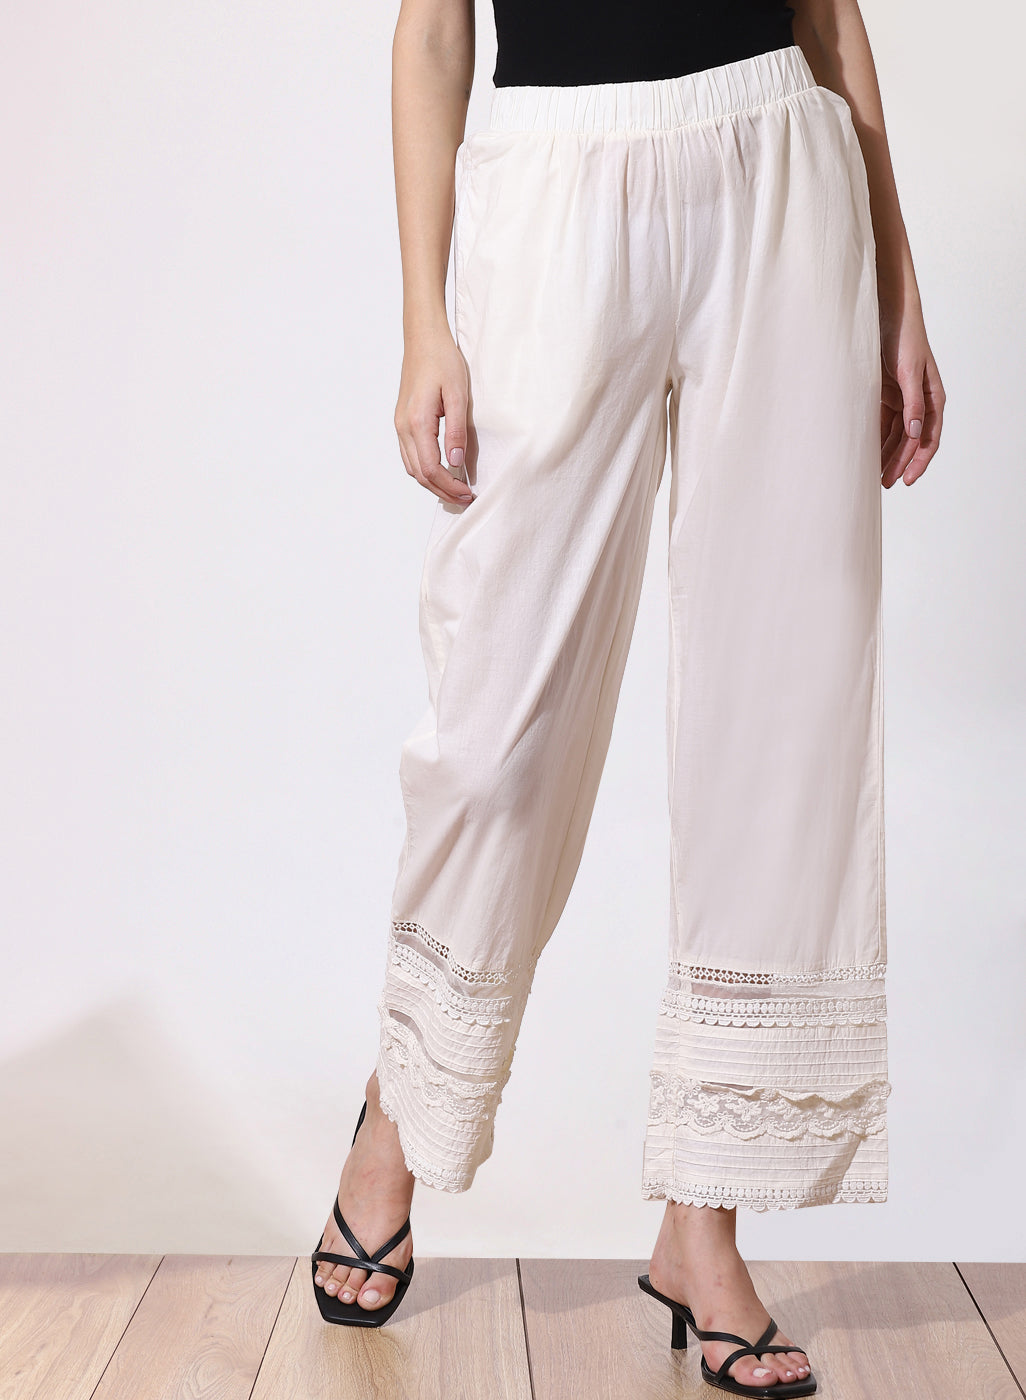 Black plain cotton palazzo pants - ETHNICALLY YOURS - 3209186